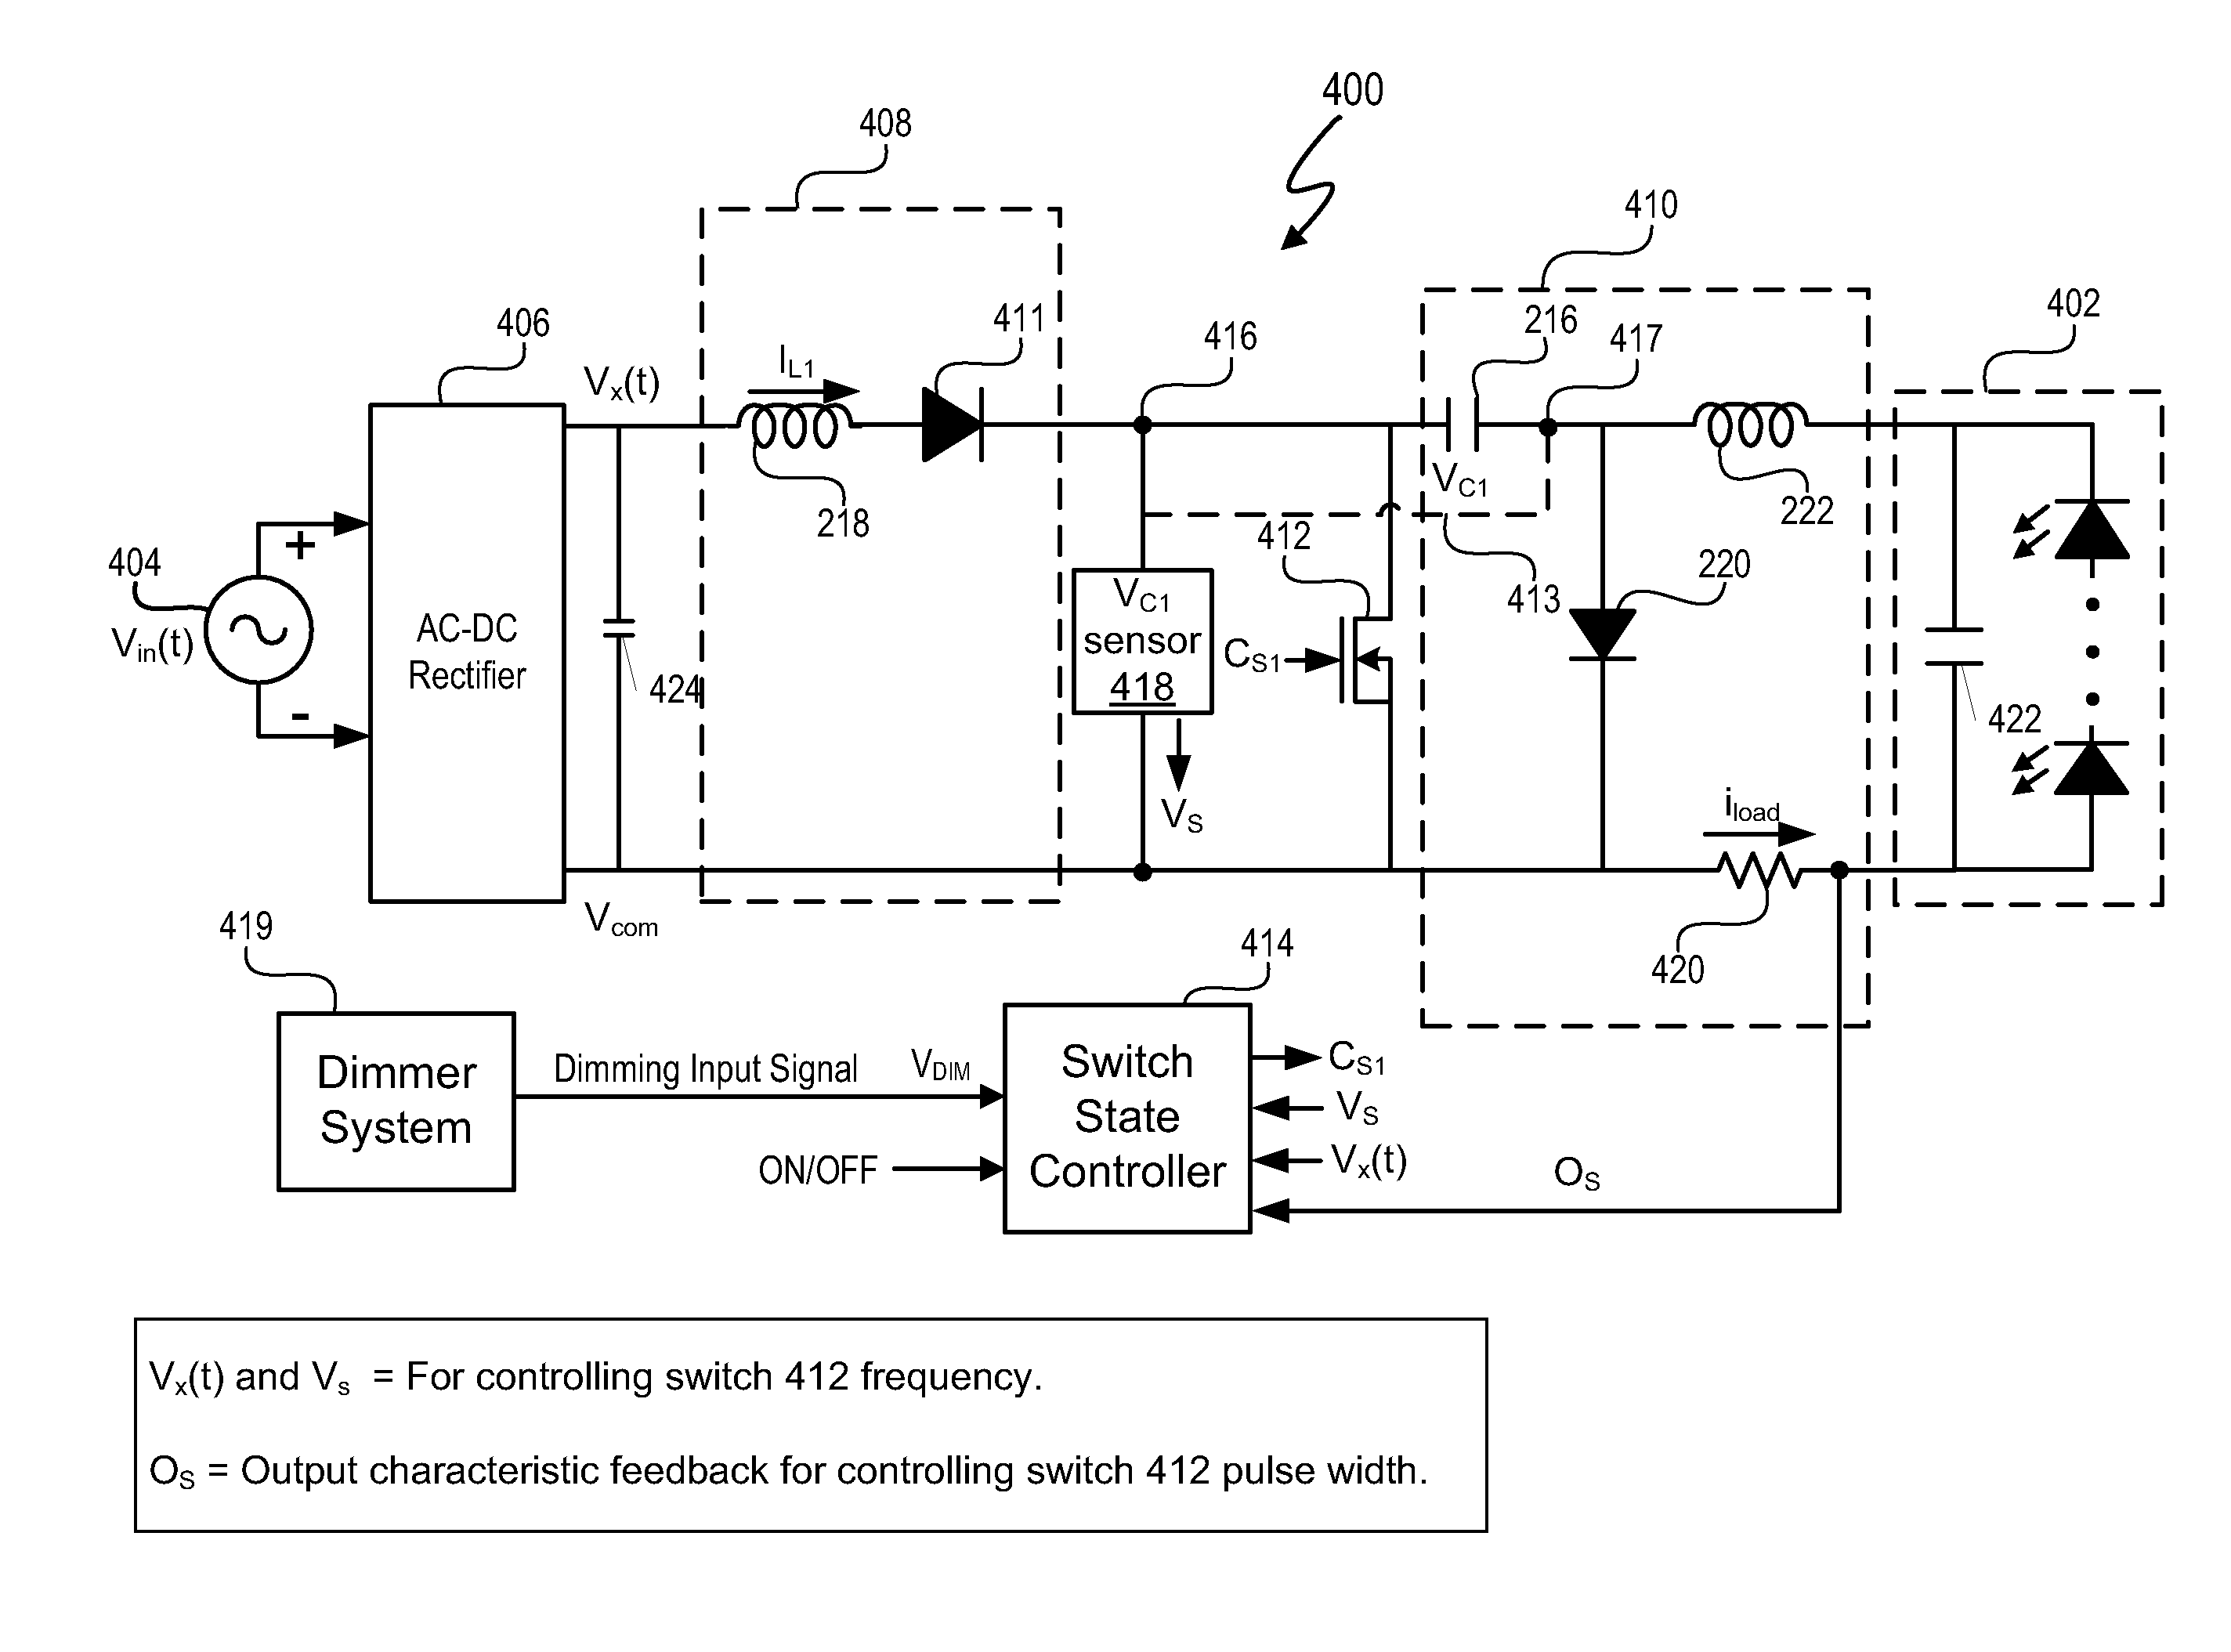 Switching power converter and control system